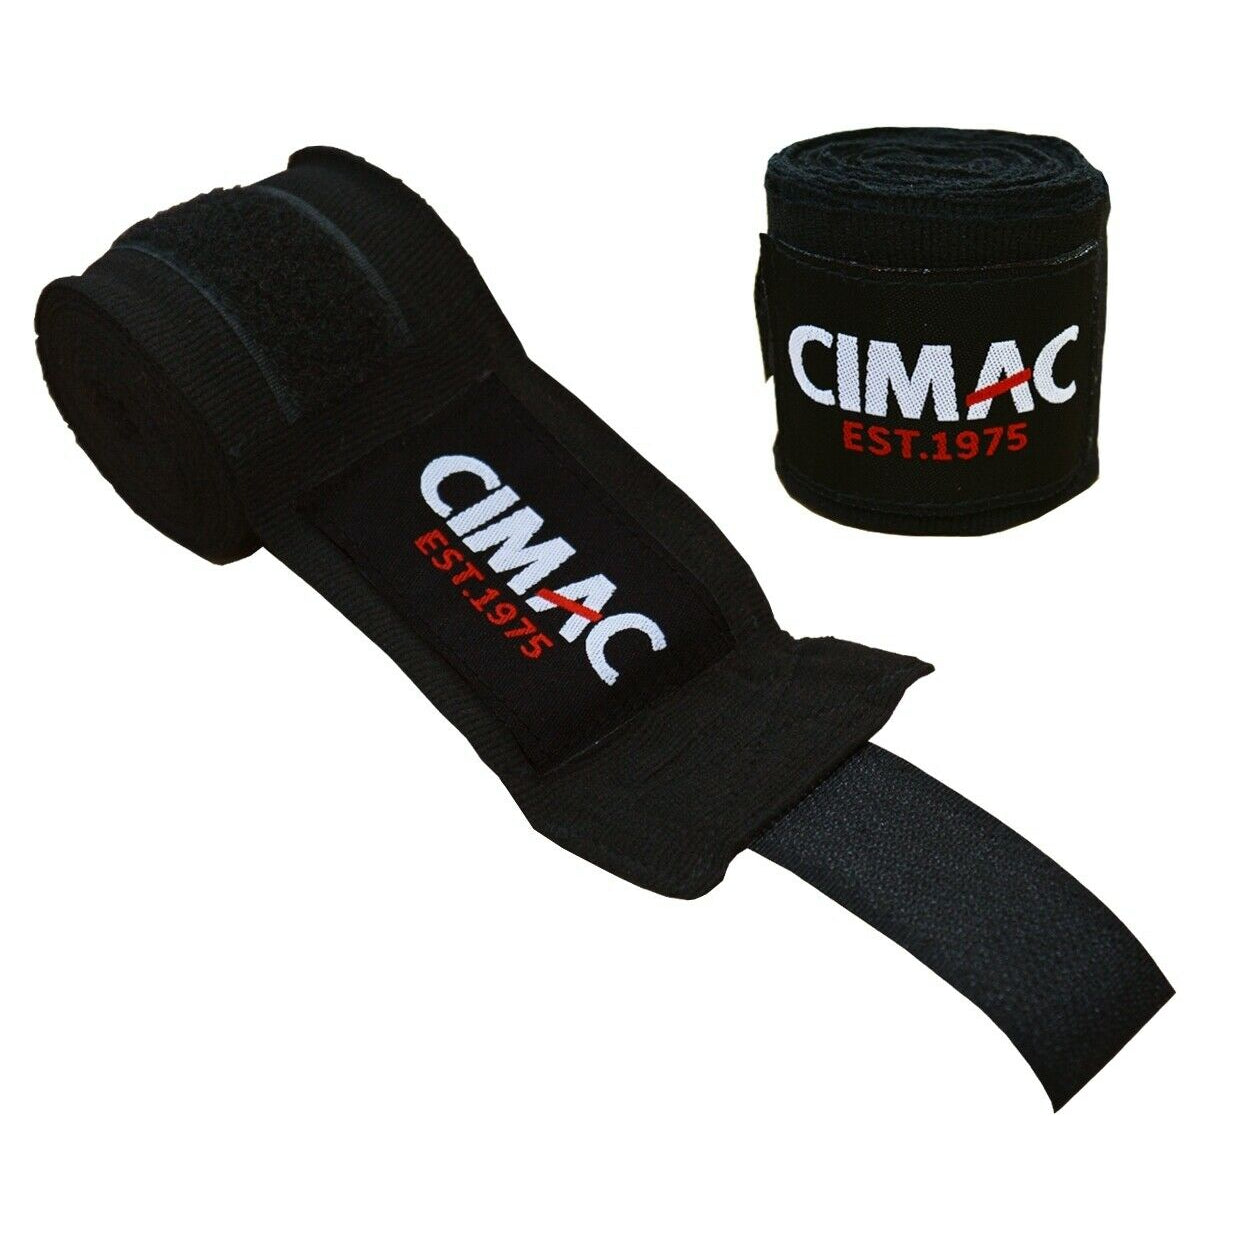 Cimac Mexican Boxing Hand Wraps Muay Thai MMA